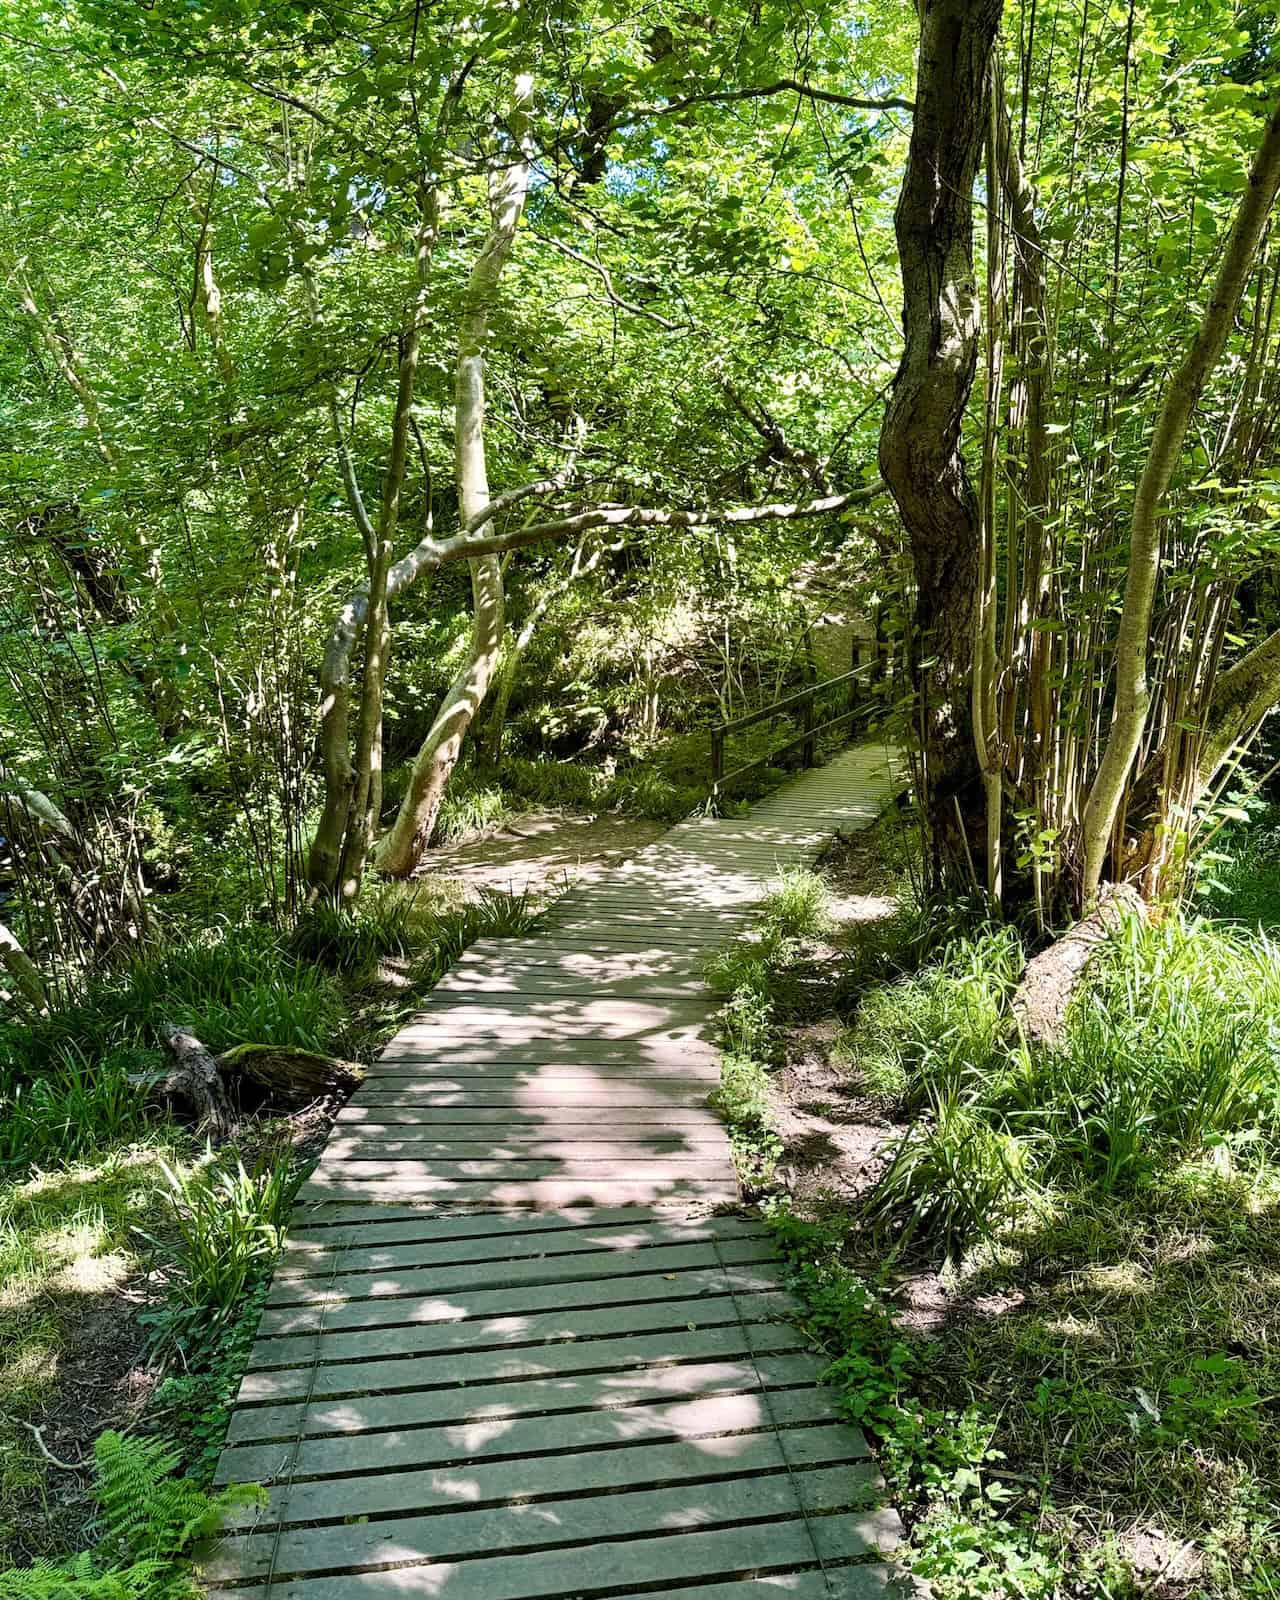 The path follows West Beck north through wooded valleys on boardwalks, then ascends out of the woods with several sets of steps.
